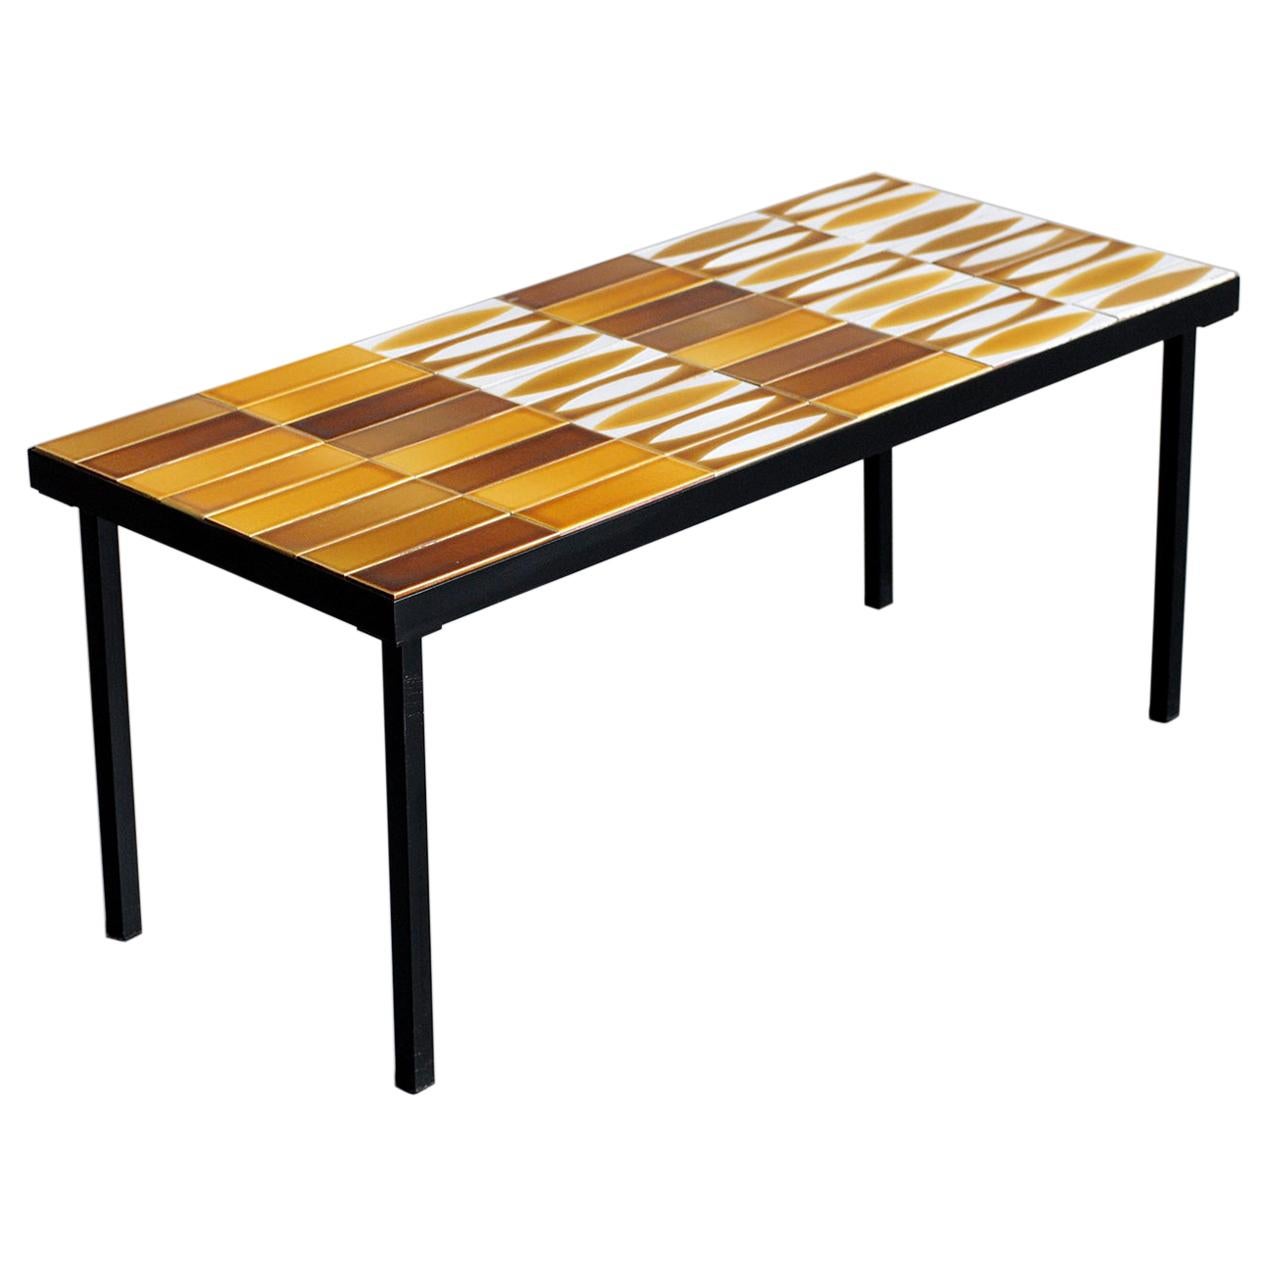 Roger Capron, "Navette" Coffee Table, 1960